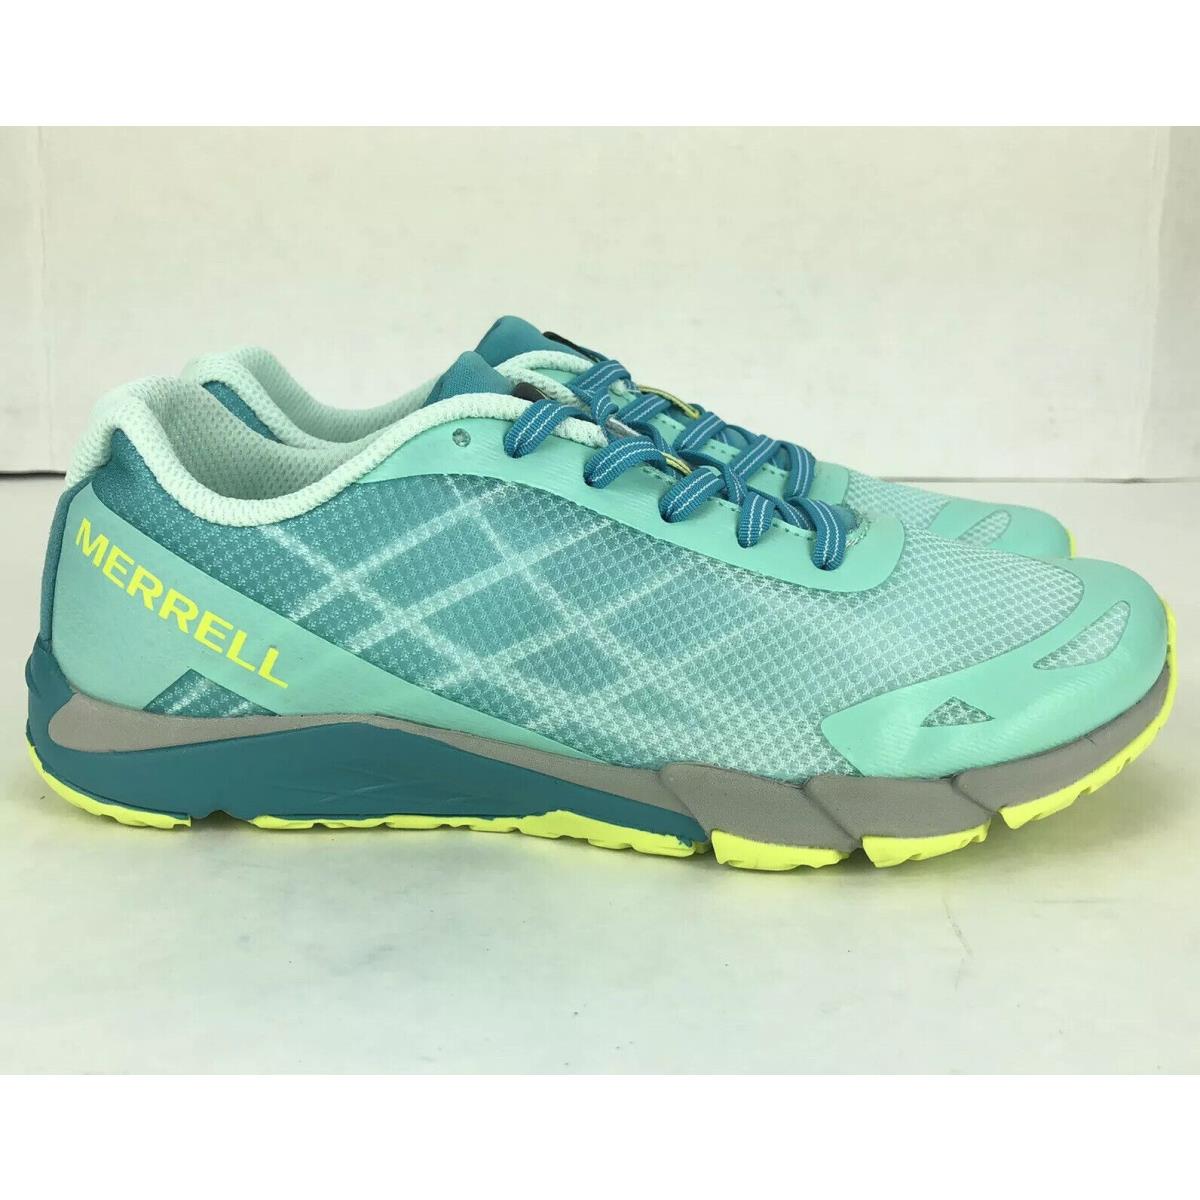 Merrell Bare Access Barefoot GS Shoes Sneakers Turquoise Blue Girls